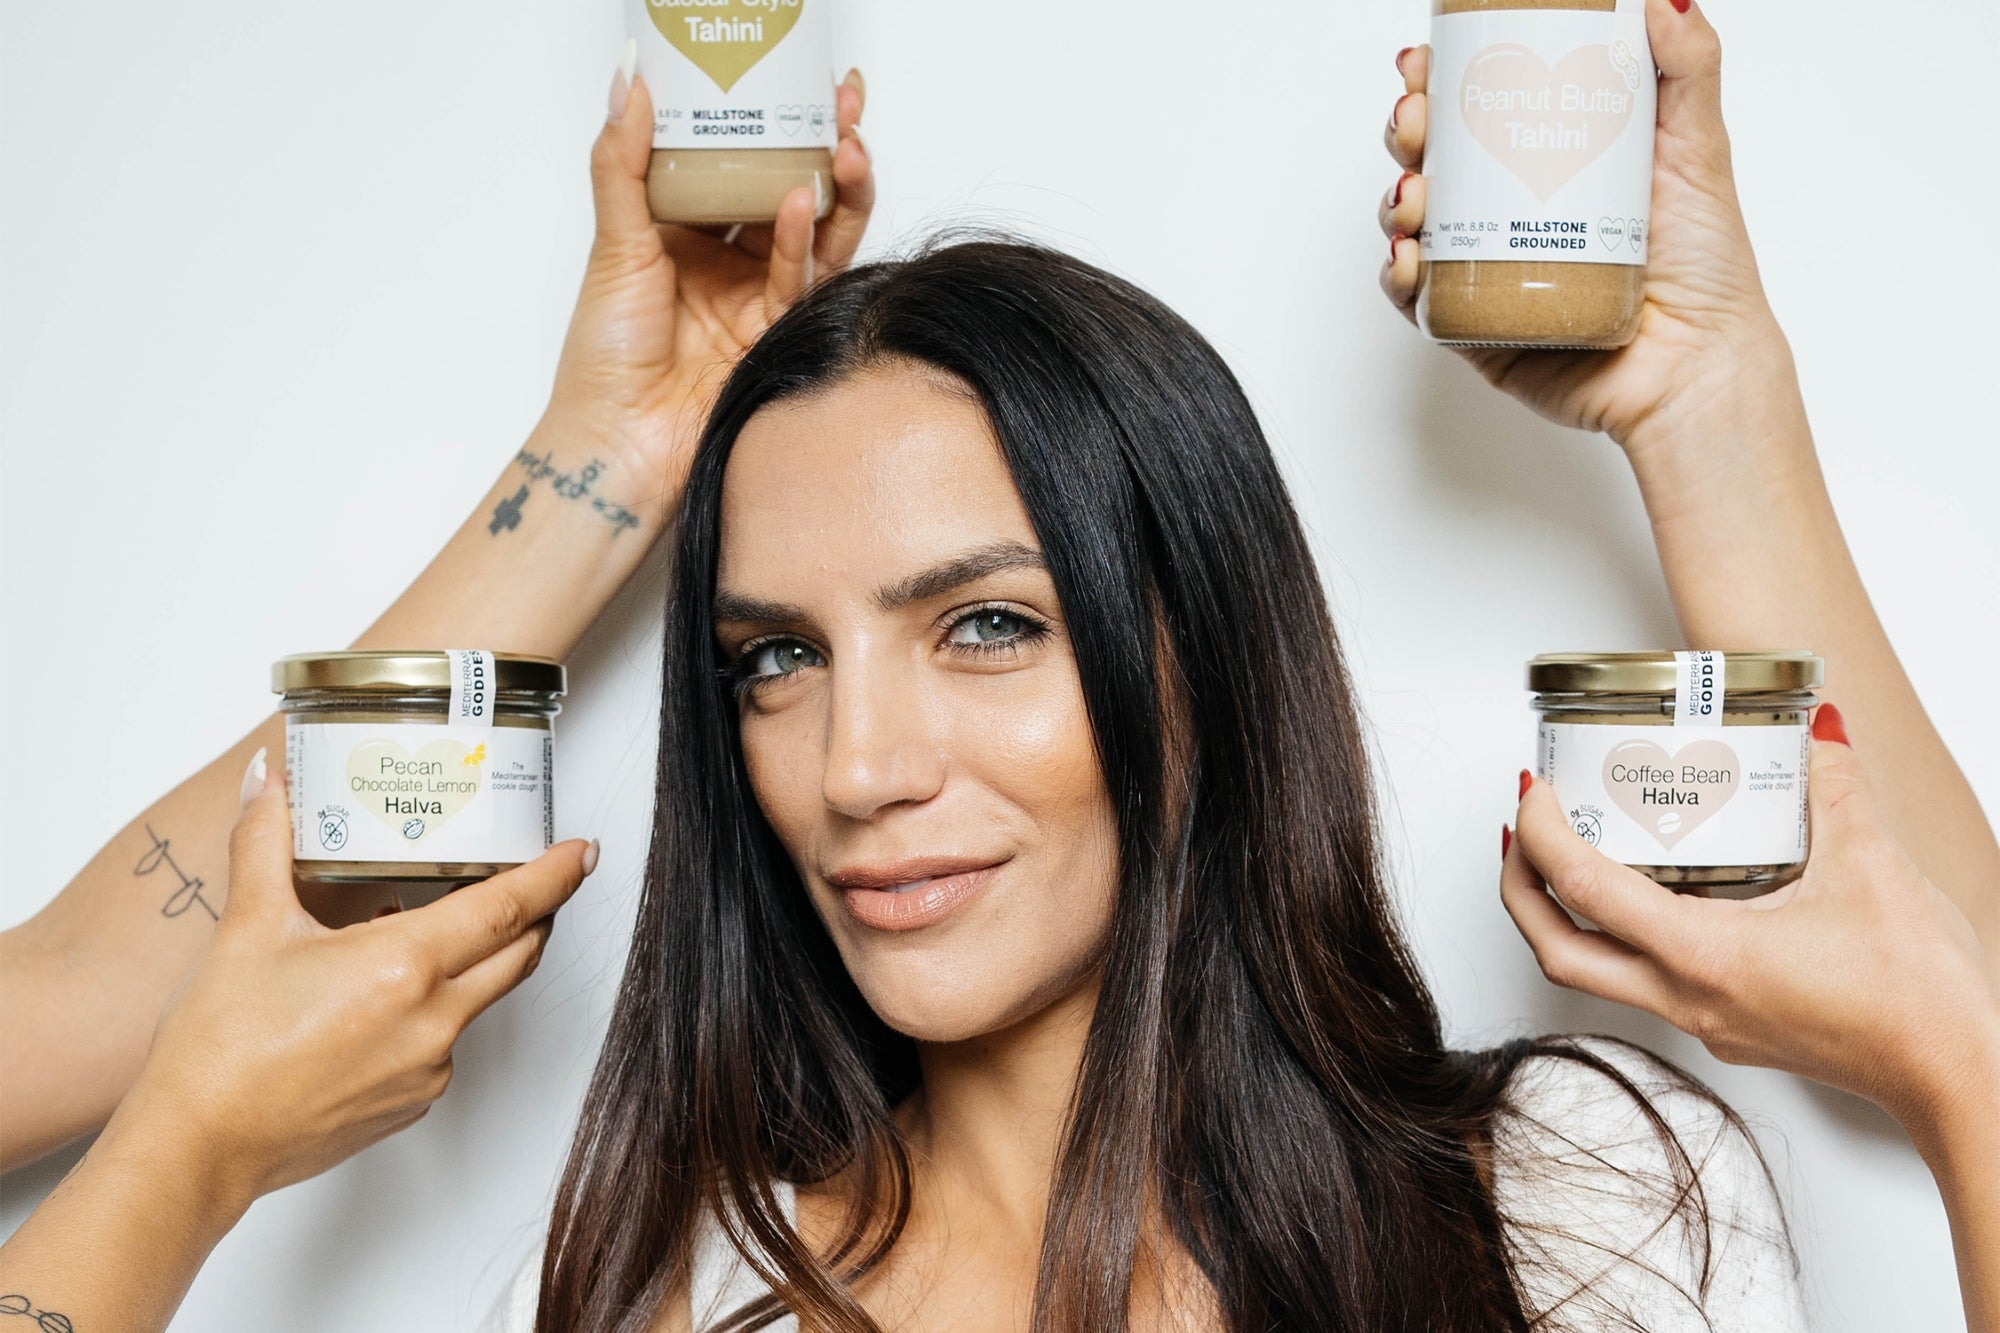 Tahini Is the Hottest New Food Trend. This Founder's Israel-Made Tahini and Sugar-Free Halva, the Only Sold in the U.S., Saw Rapid Success Despite the Pandemic.